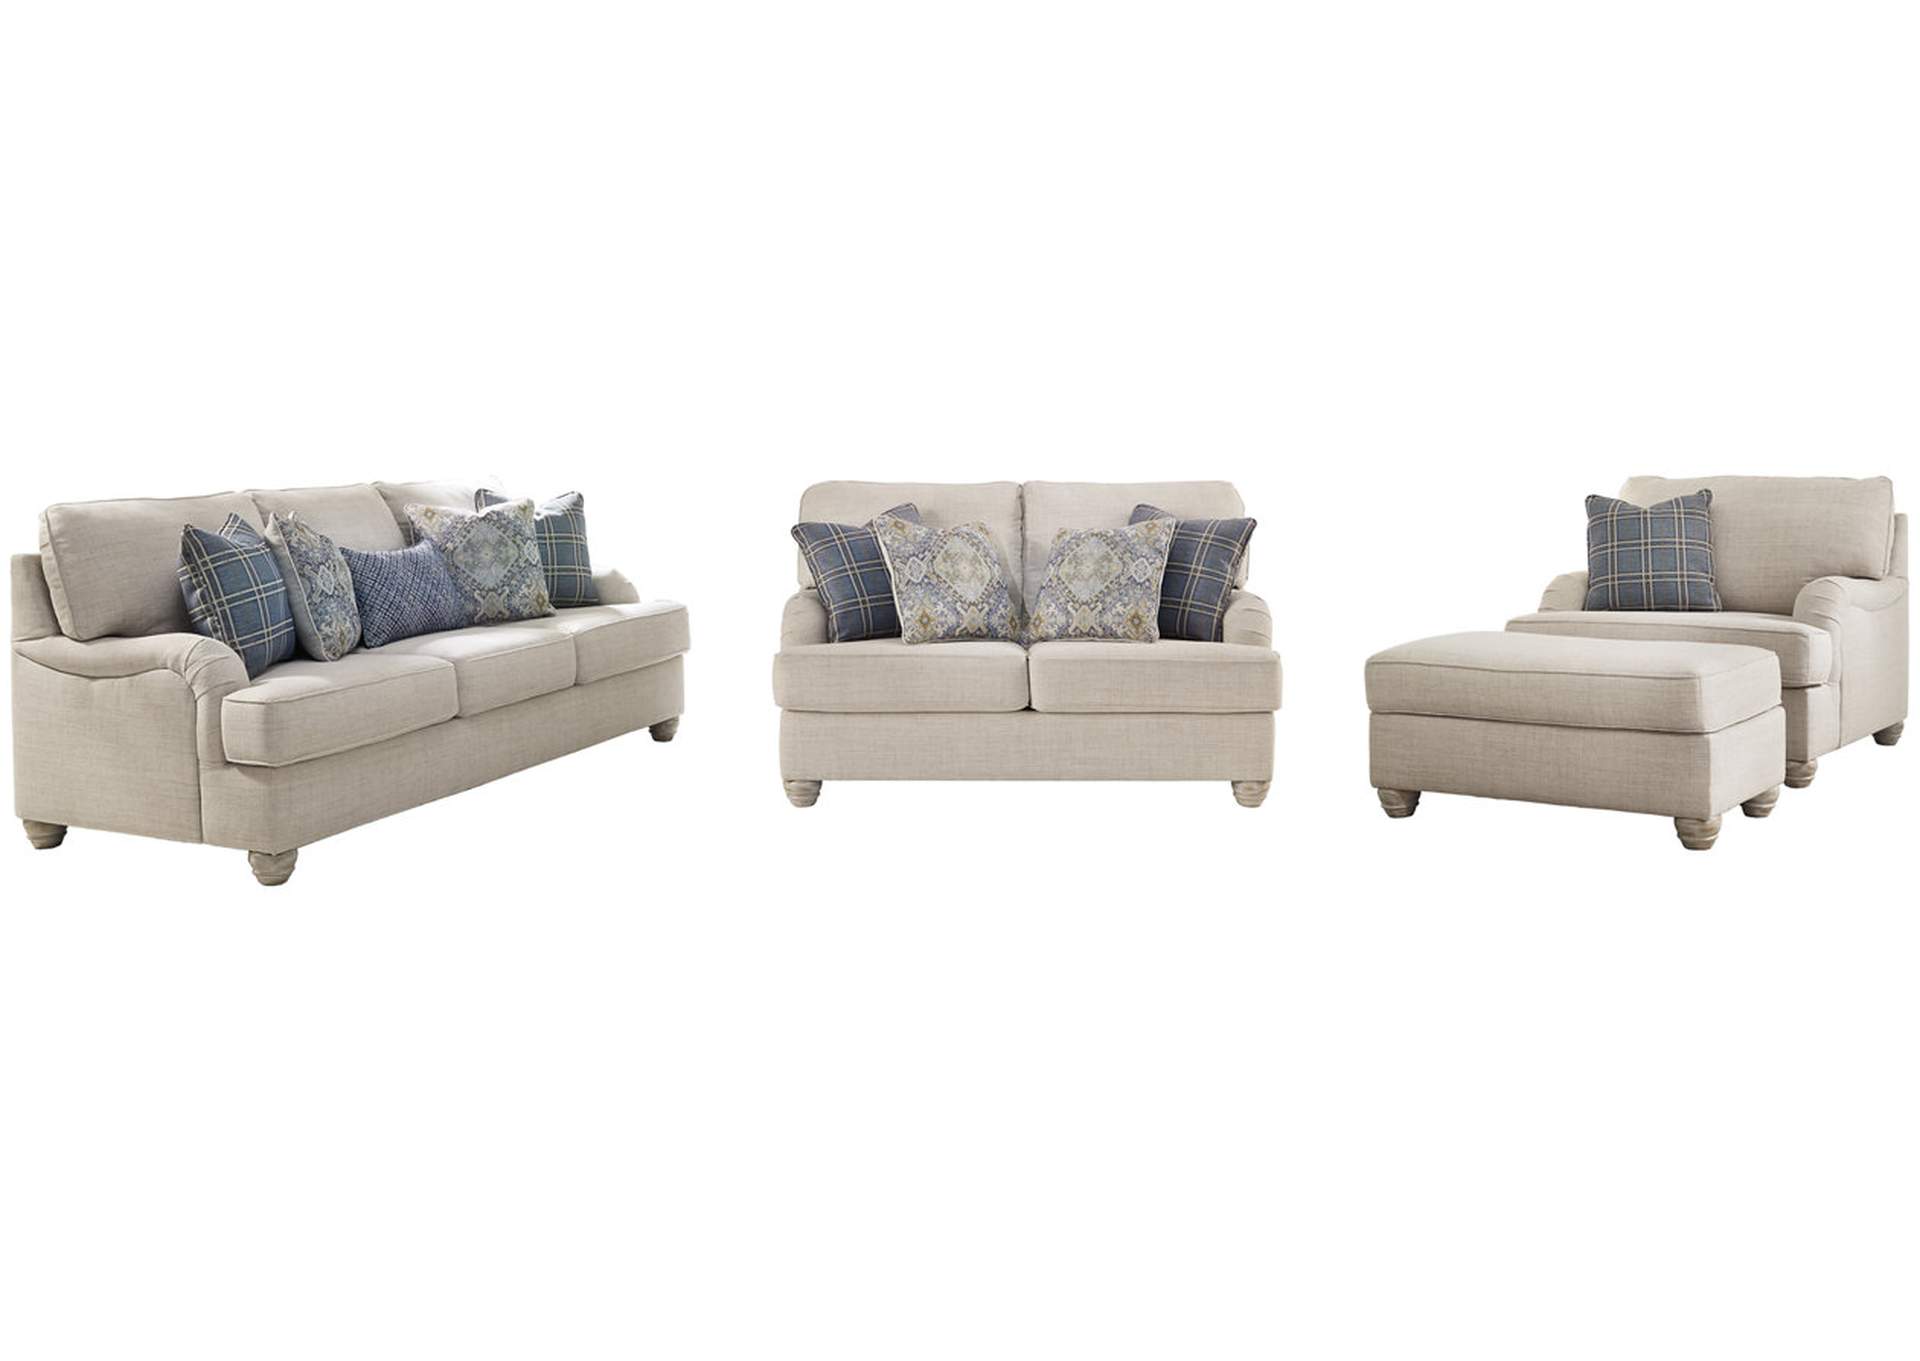 Traemore Sofa, Loveseat, Chair and Ottoman,Benchcraft